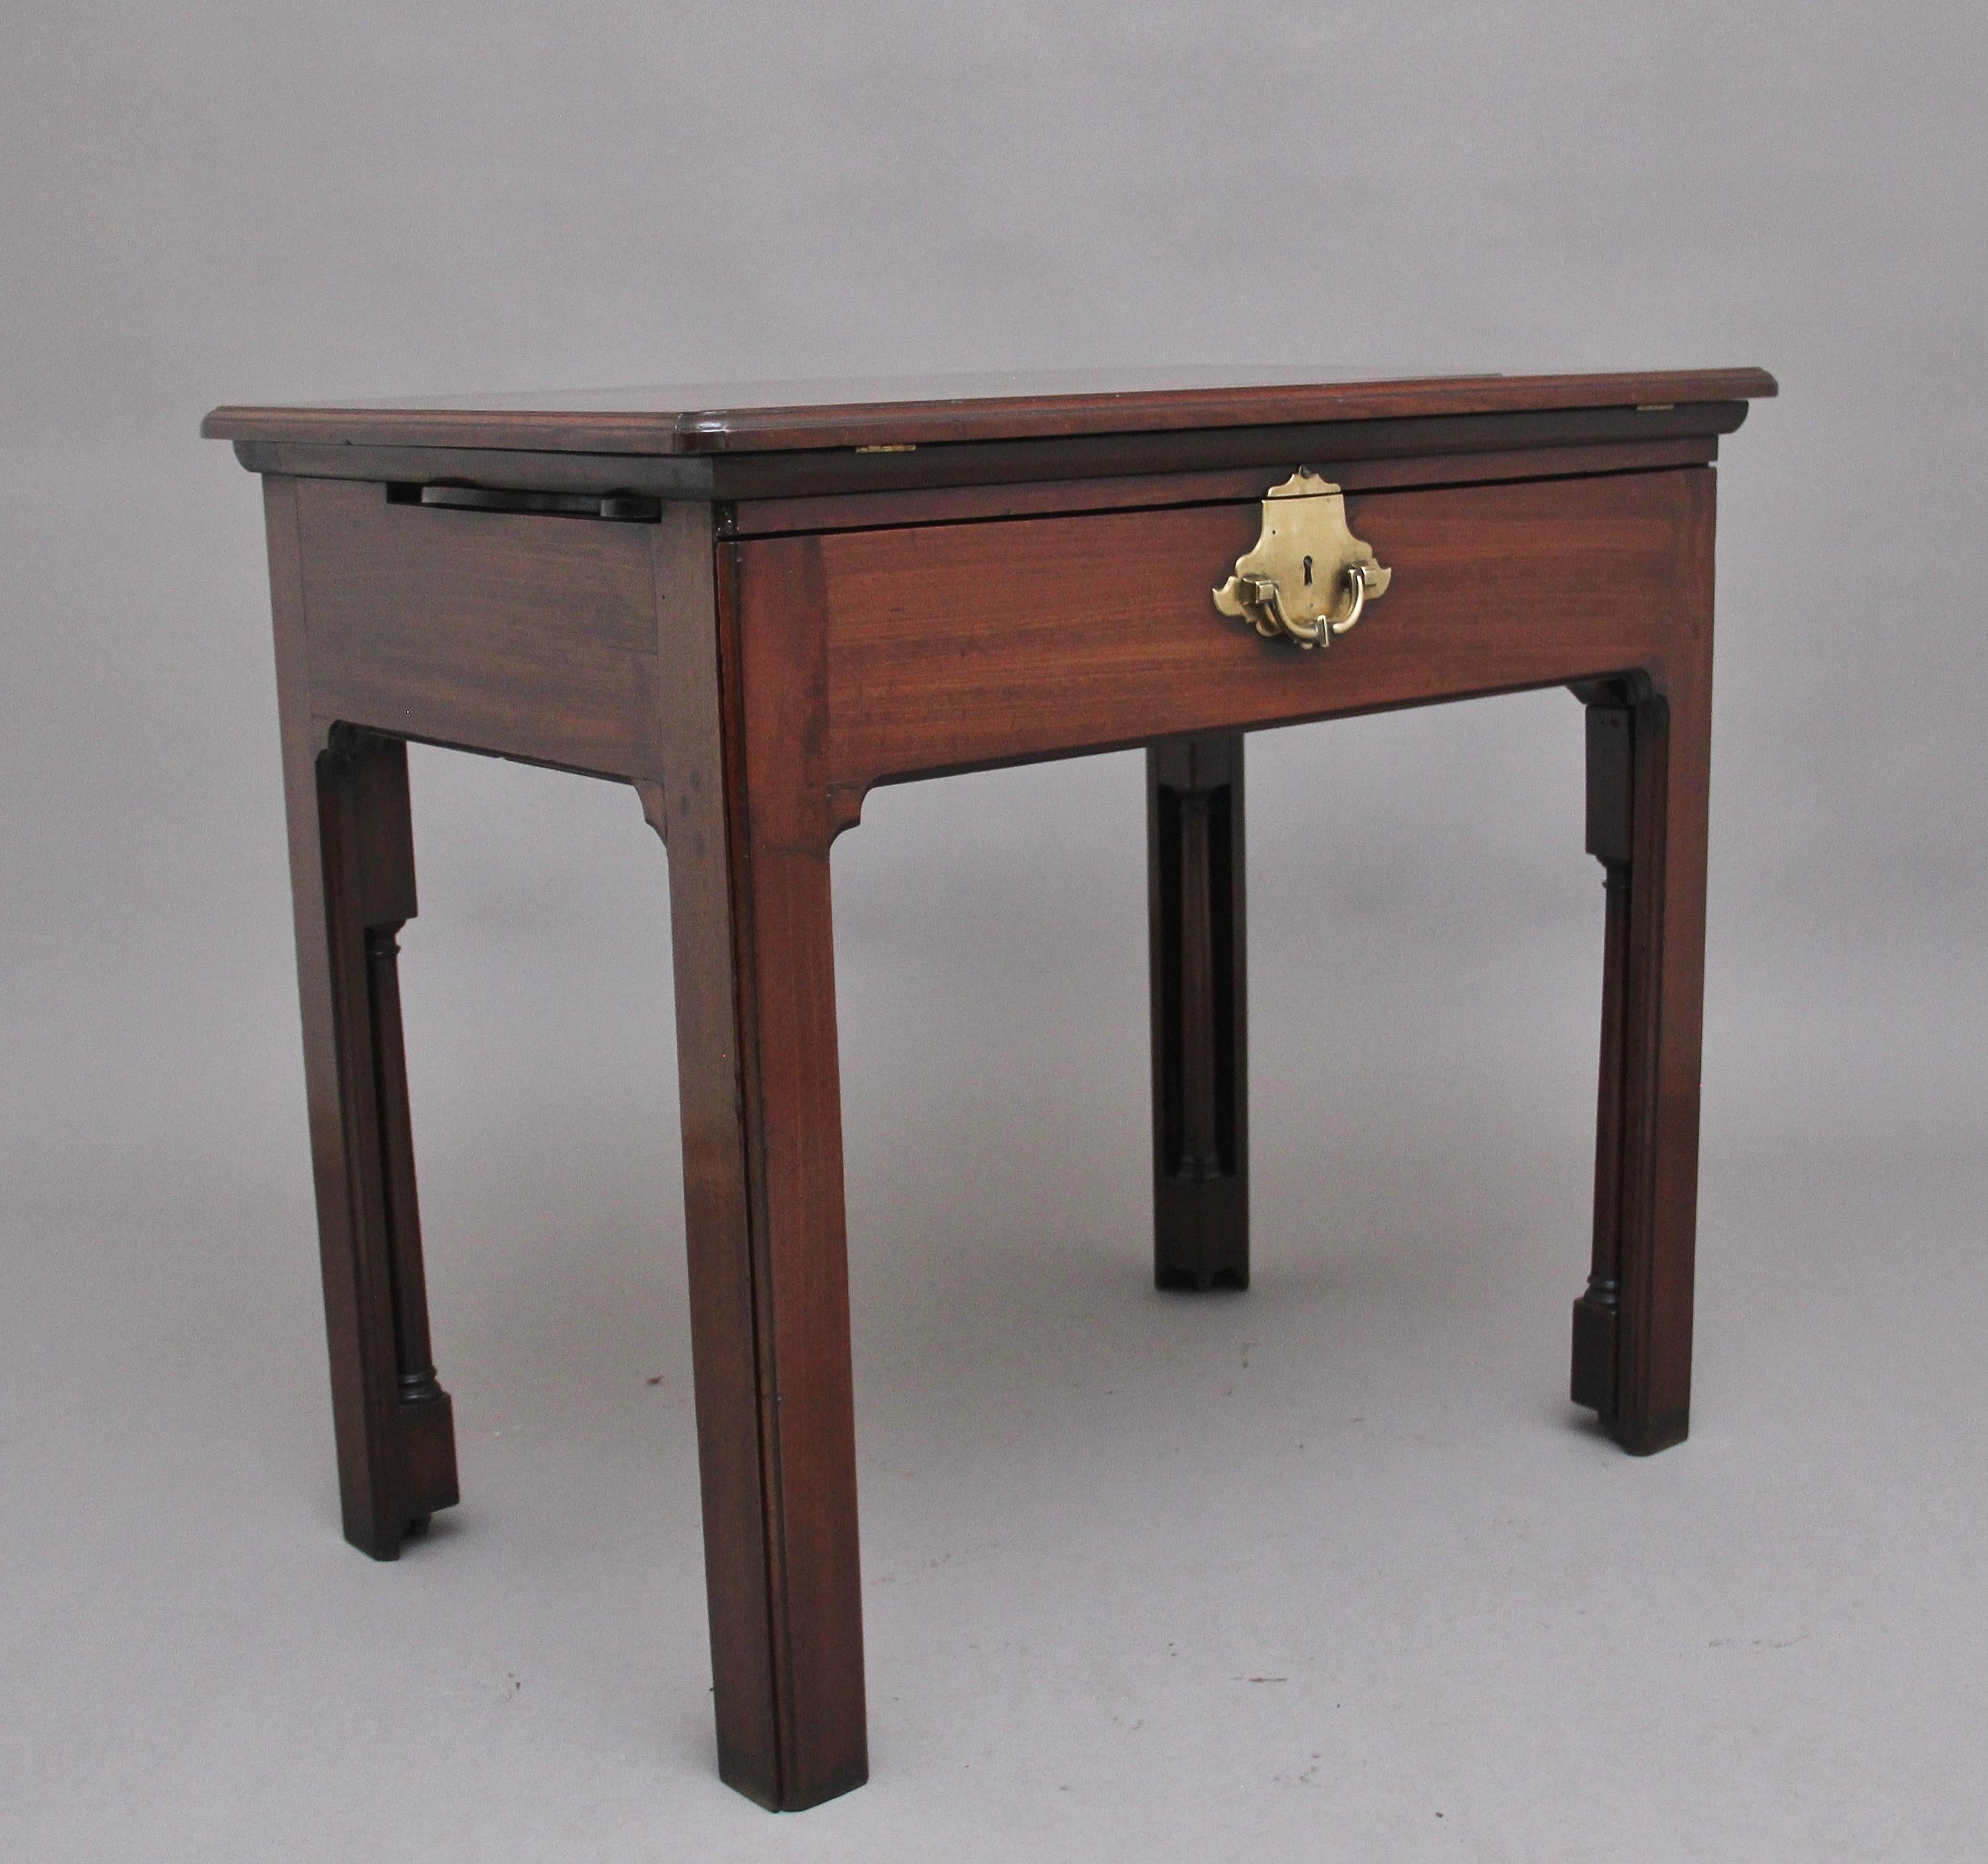 18th Century mahogany architect’s table / desk, the hinged top lifts up and adjusts to various angles, the table / drawer pulls out to reveal a green baize writing surface which slides back to reveal various compartments, either side of the table